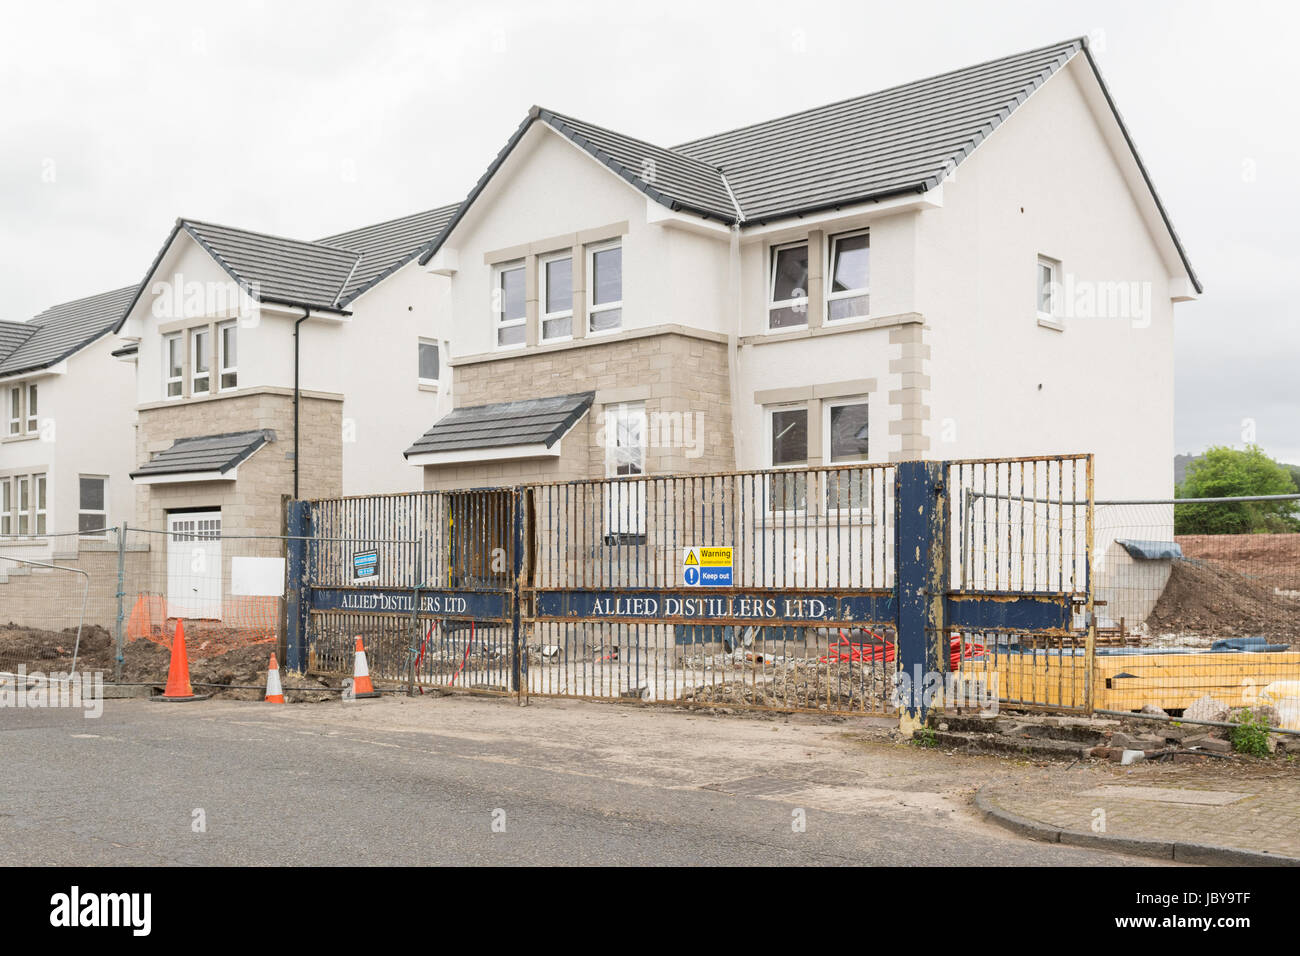 Dumbarton, Scotland - new housing development being built on the former Allied Distillers site Stock Photo